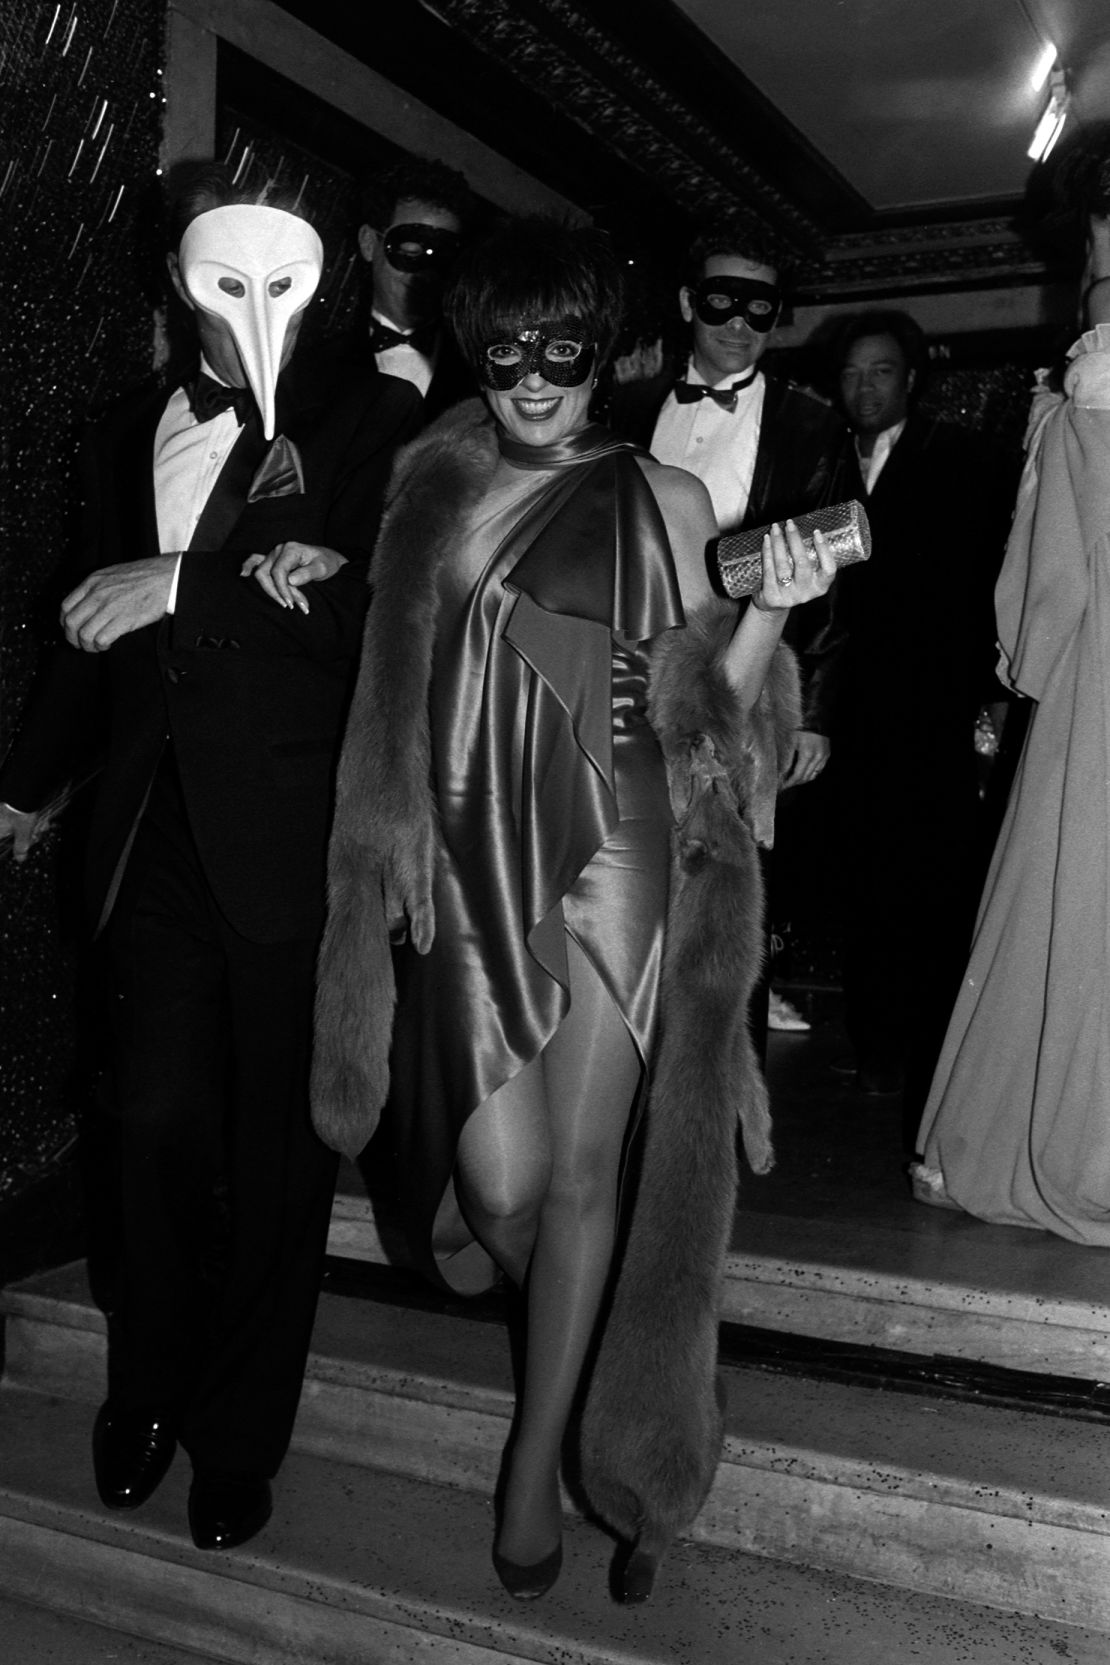 Halston and Liza Minnelli arrive at the Diamond Horseshoe club for a Halloween party in 1988.